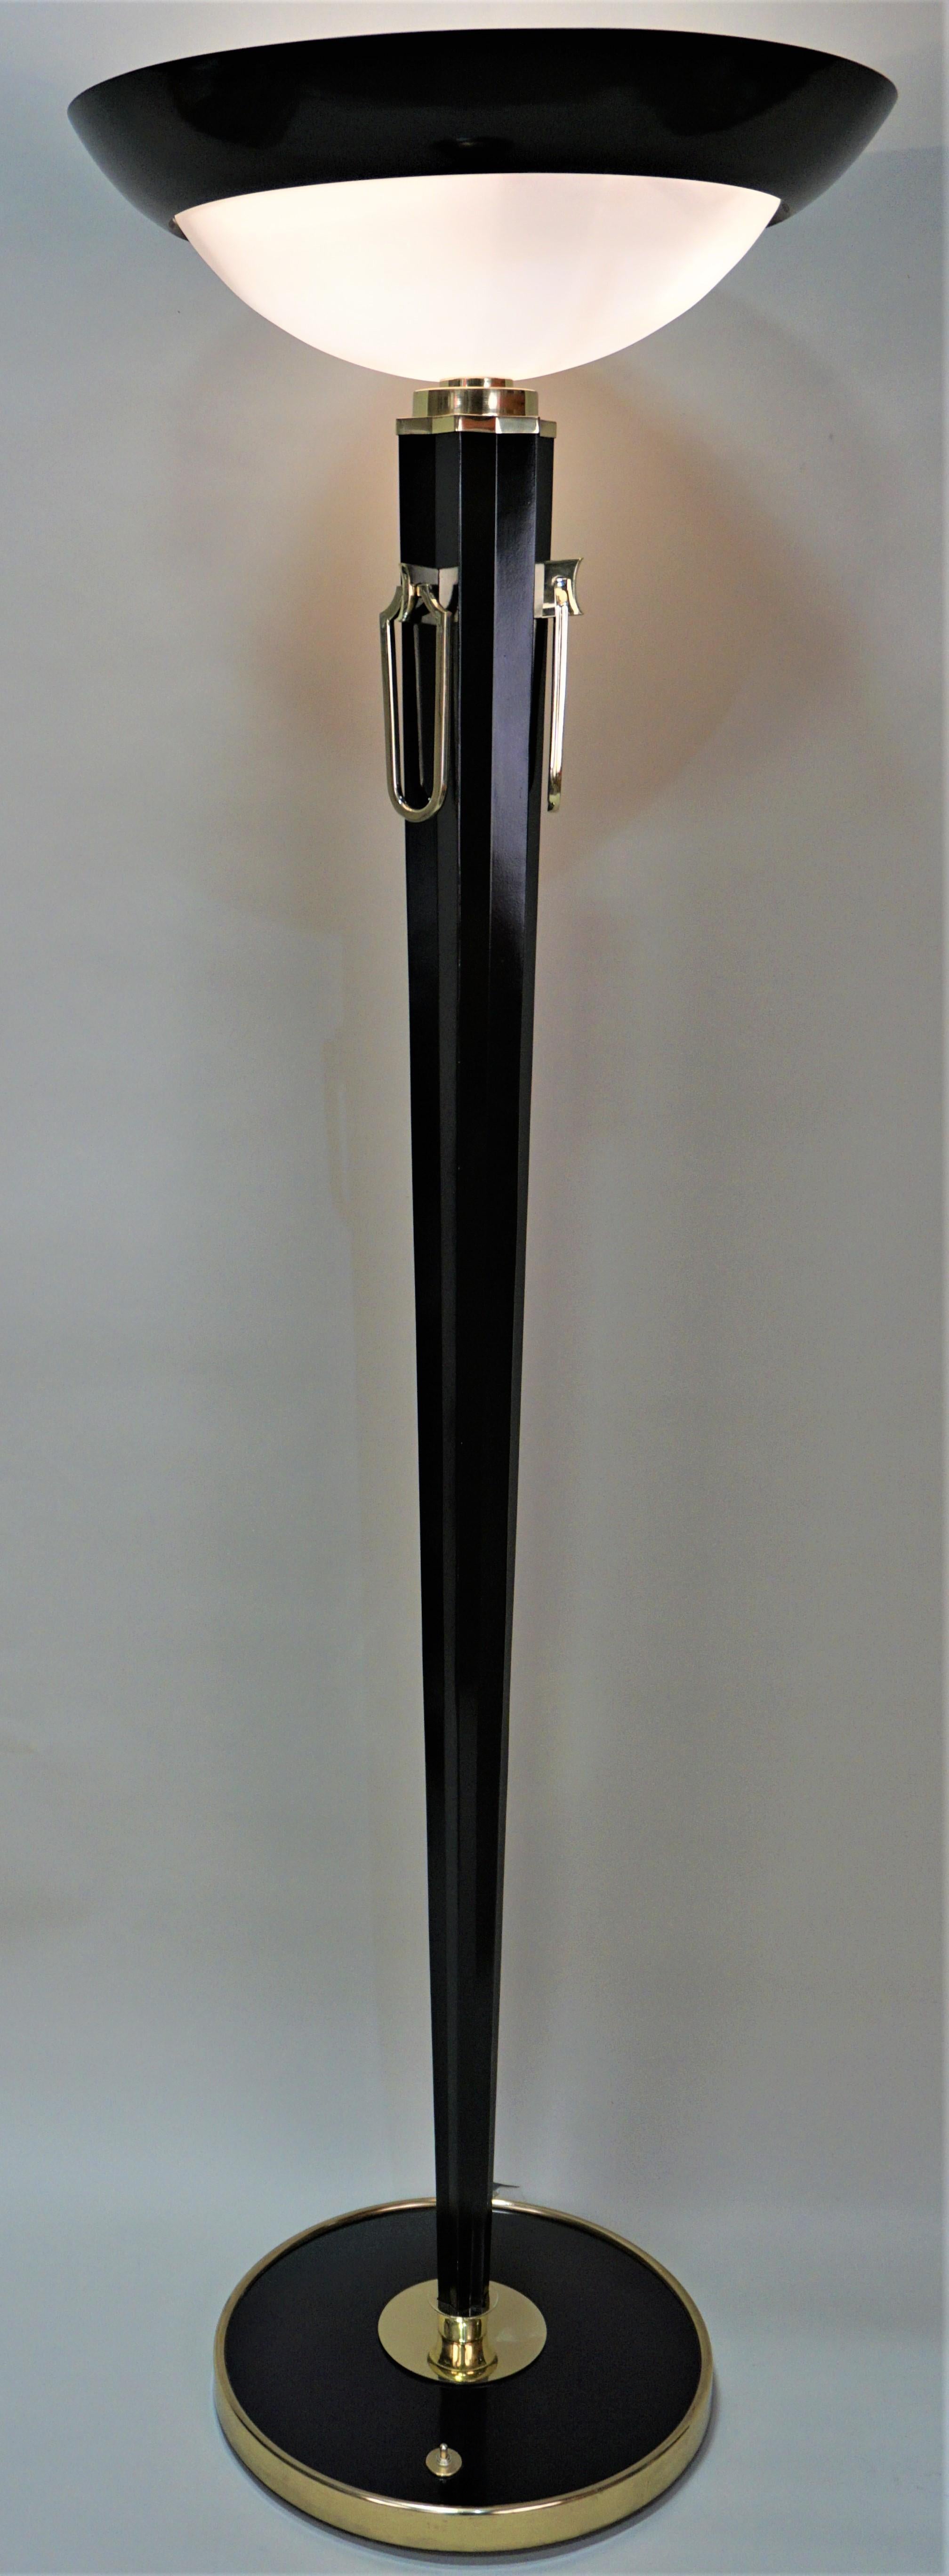 French 1930s Art Deco Torchiere Floor Lamp 3